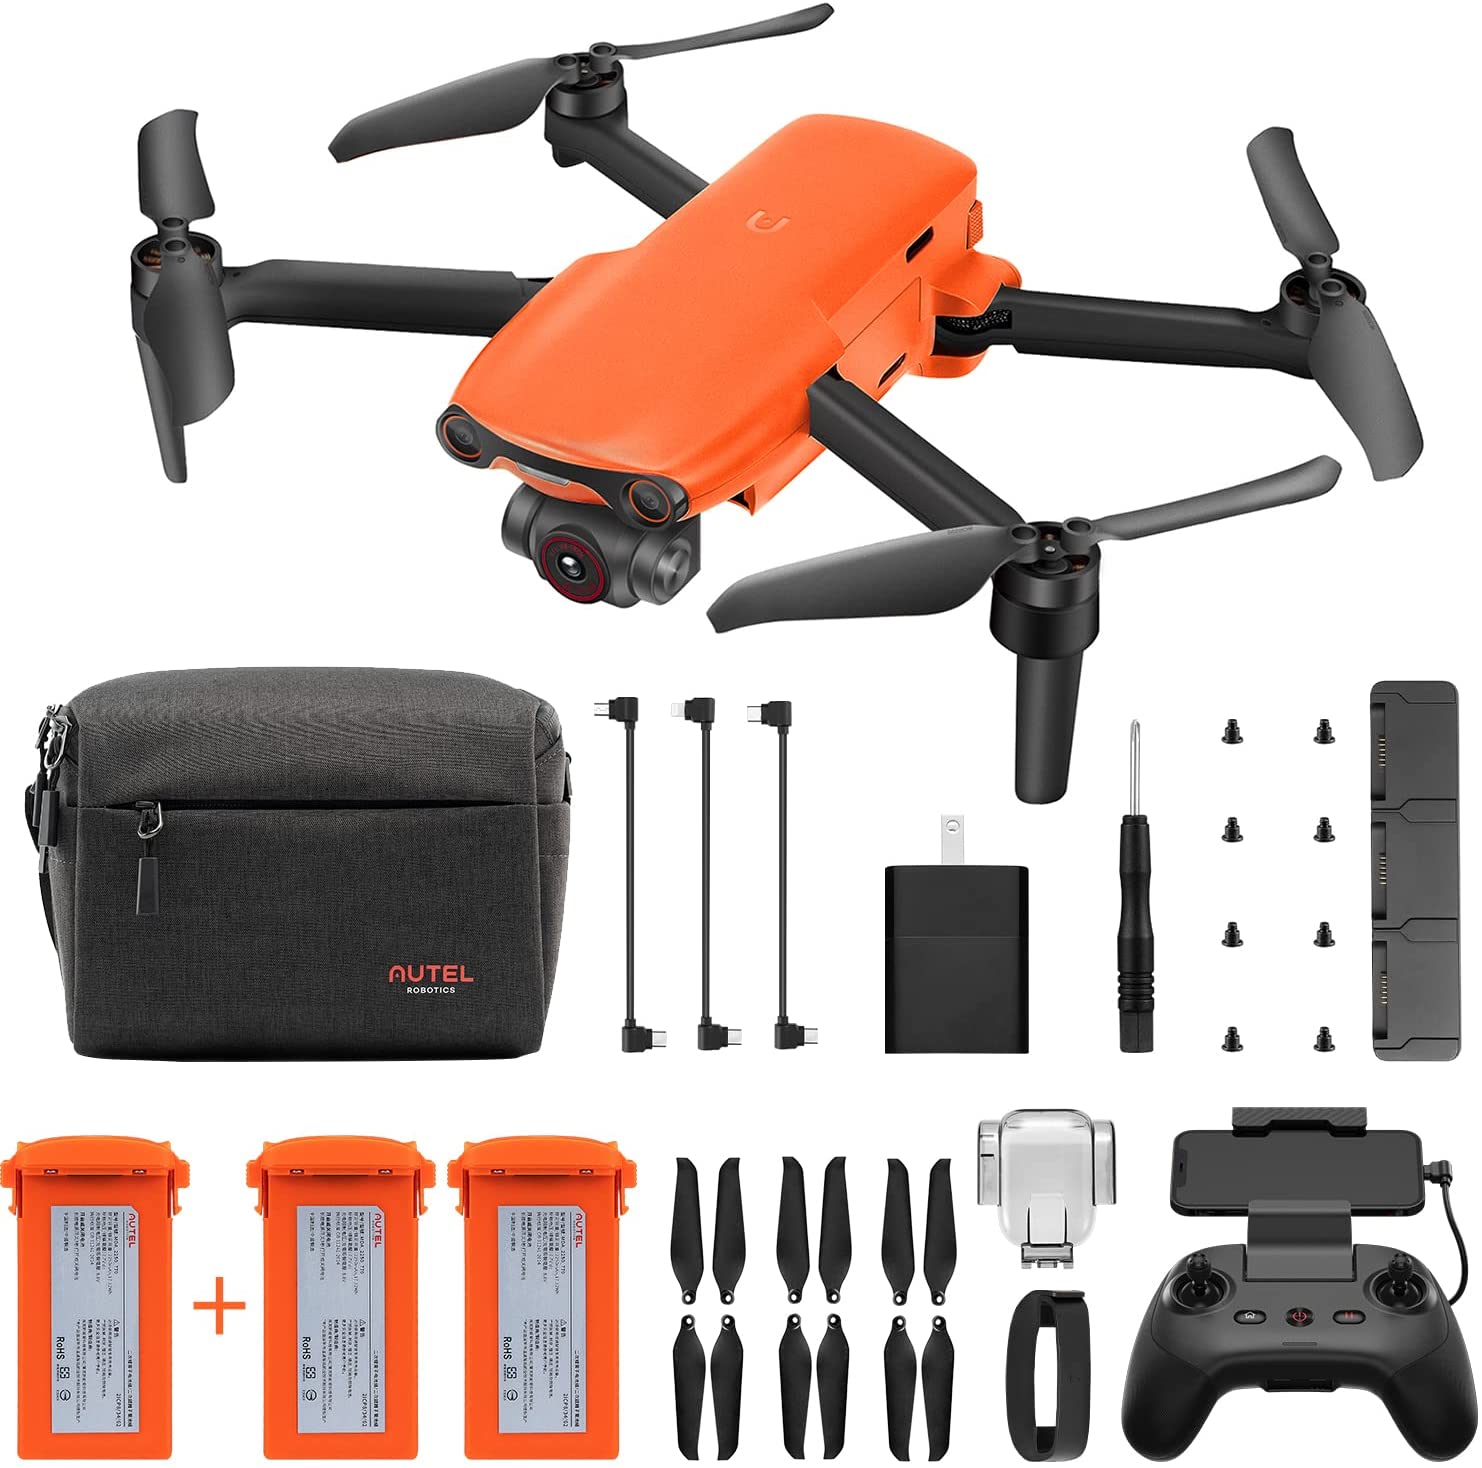 Autel Robotics EVO Nano+ Drone, 1/2" CMOS 48MP 4K/30fps HDR Video Master Subject Tracking Advanced Obstacle Avoidance 10km 2.7K Video Transmission, 249g Ultralight Foldable Camera Quadcopter with 3-Axis Gimbal